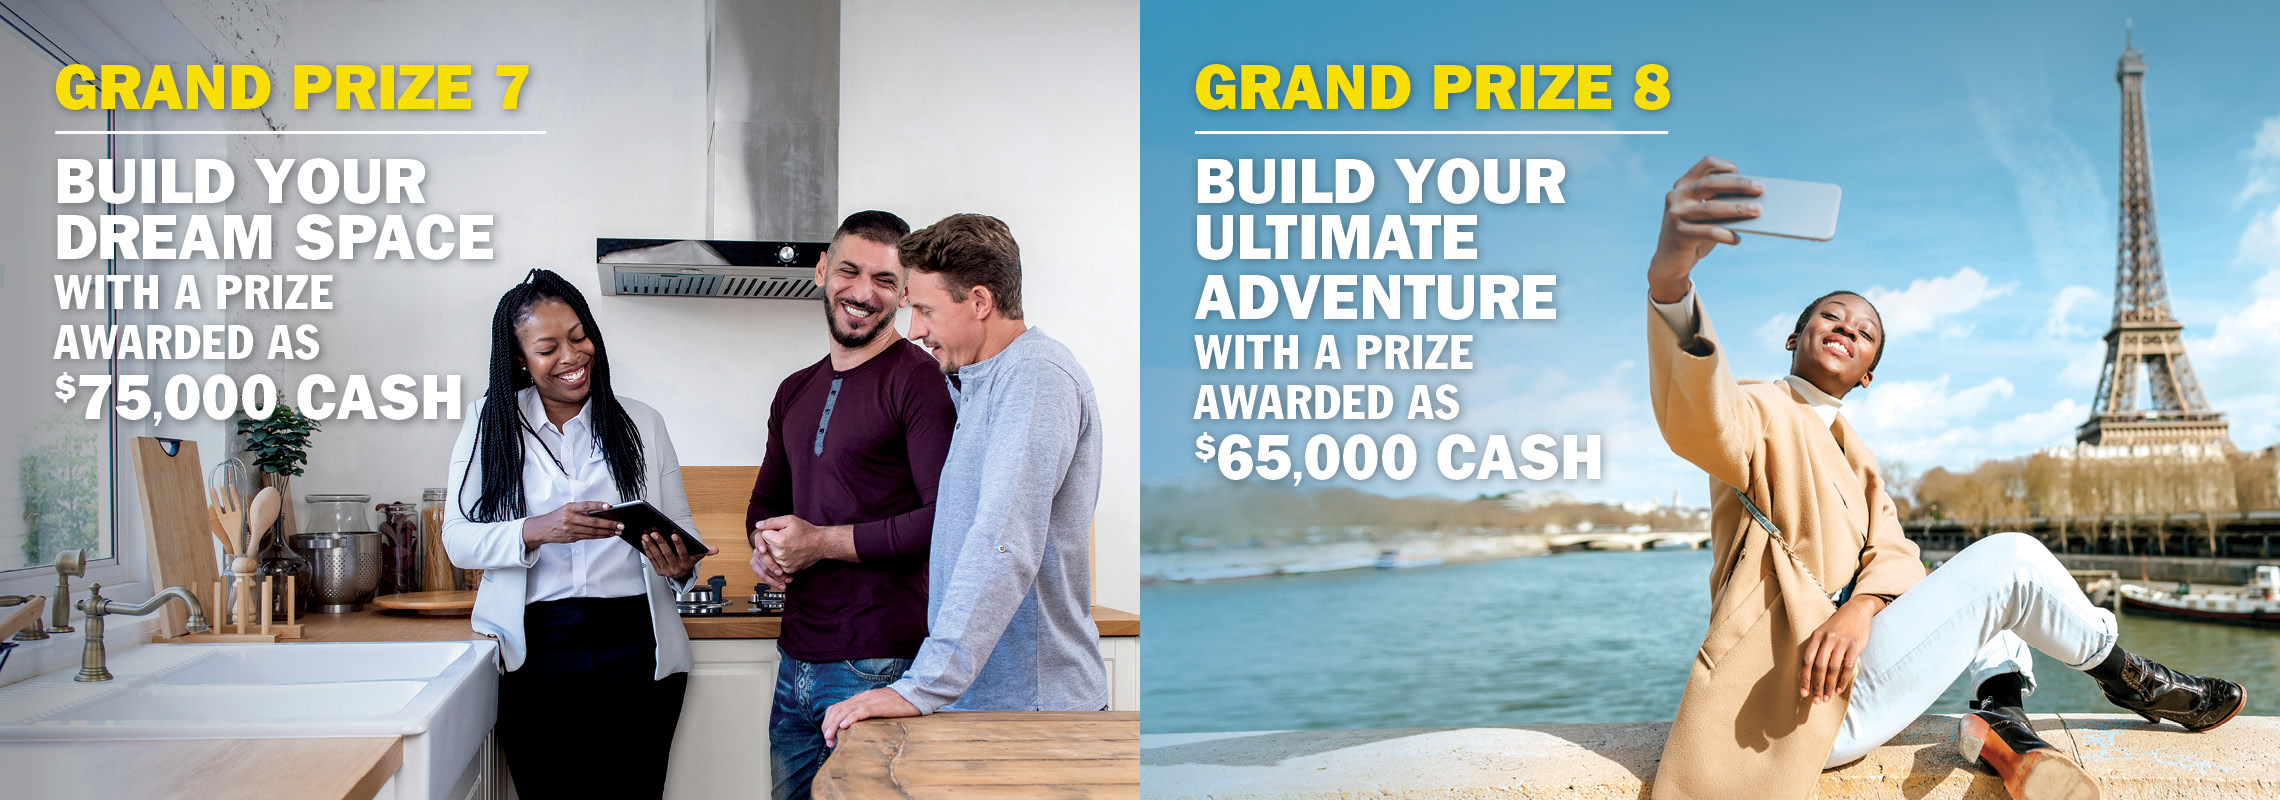 Grand Prize 7 - Build your dream space with $75,000 cash. Grand Prize 8 - Build your ultimate adventure with $65,000 cash.